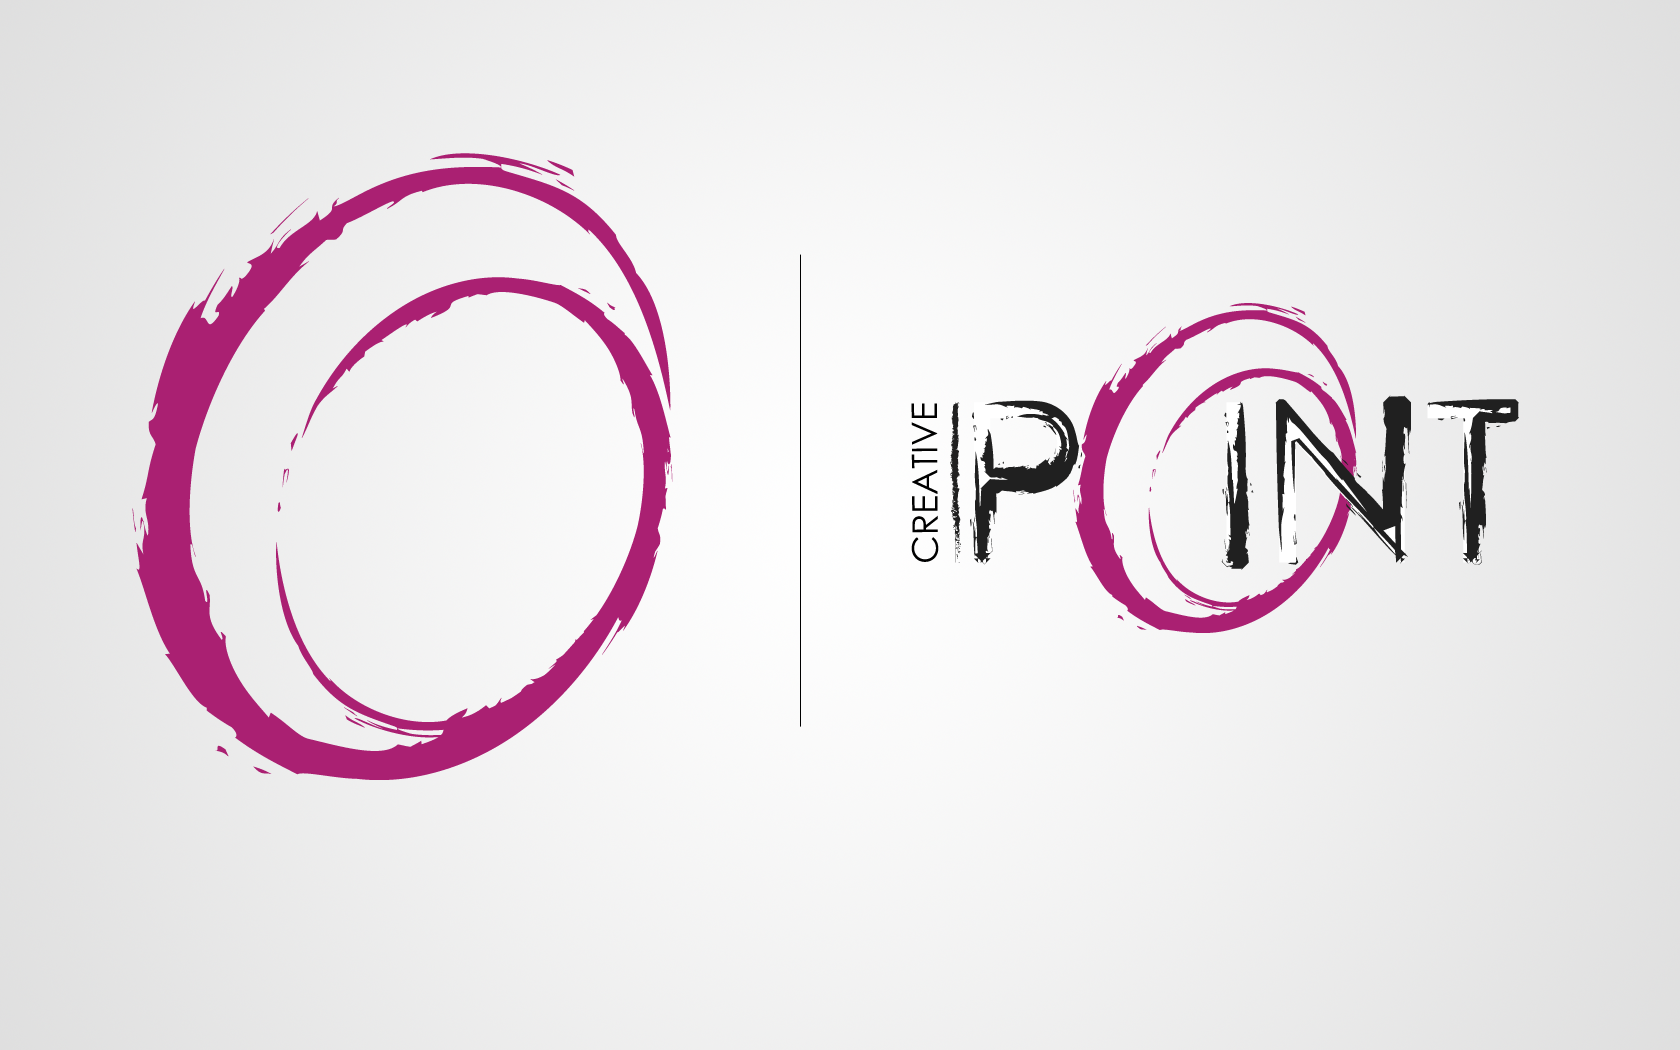 CREATIVE POINT LOGO by SALAM, SOL on Deviant. 